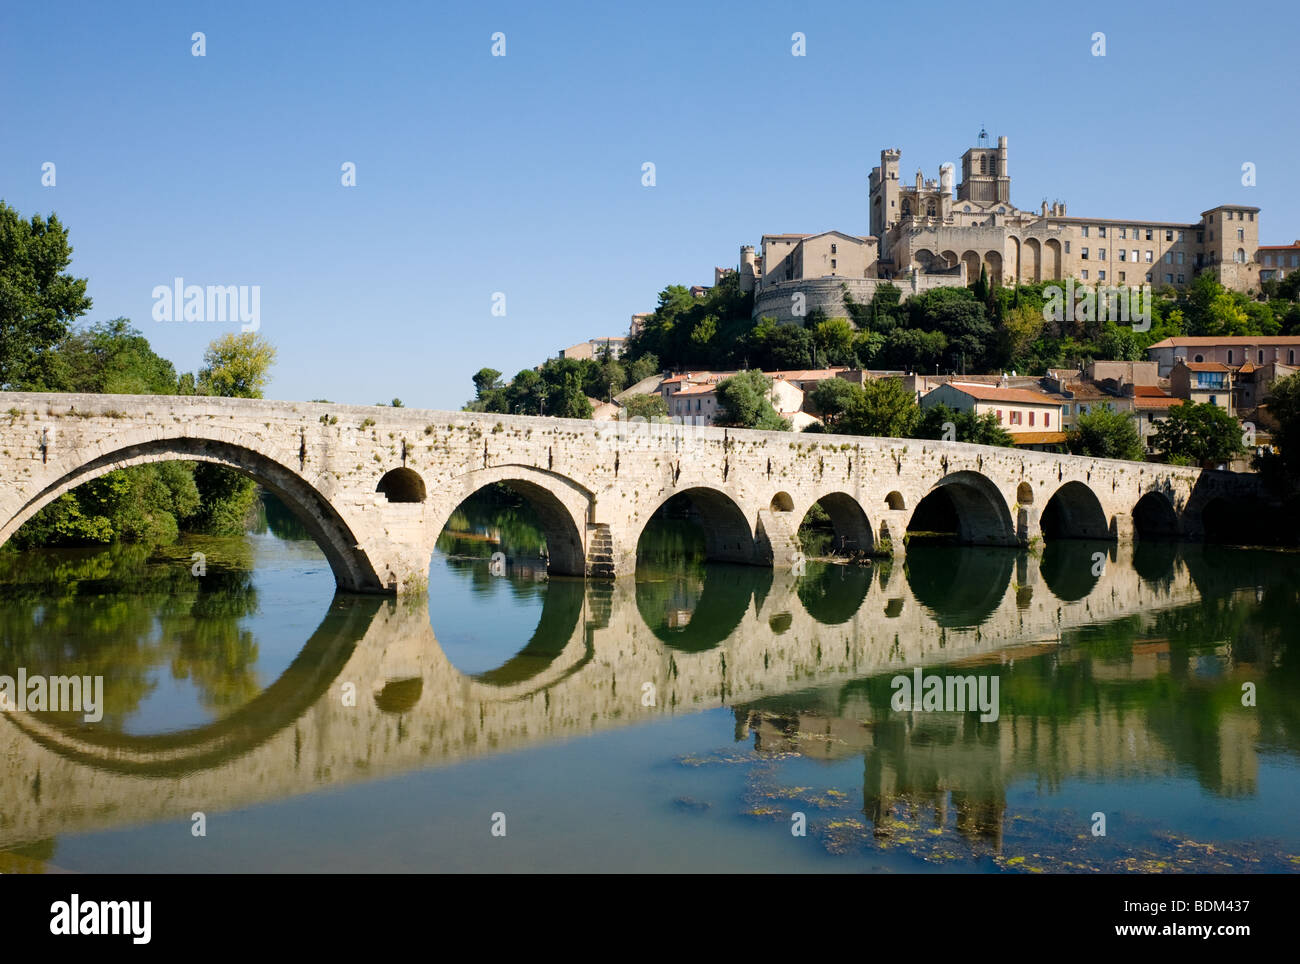 The old bridge over the River Orb in the French town of Beziers Stock Photo